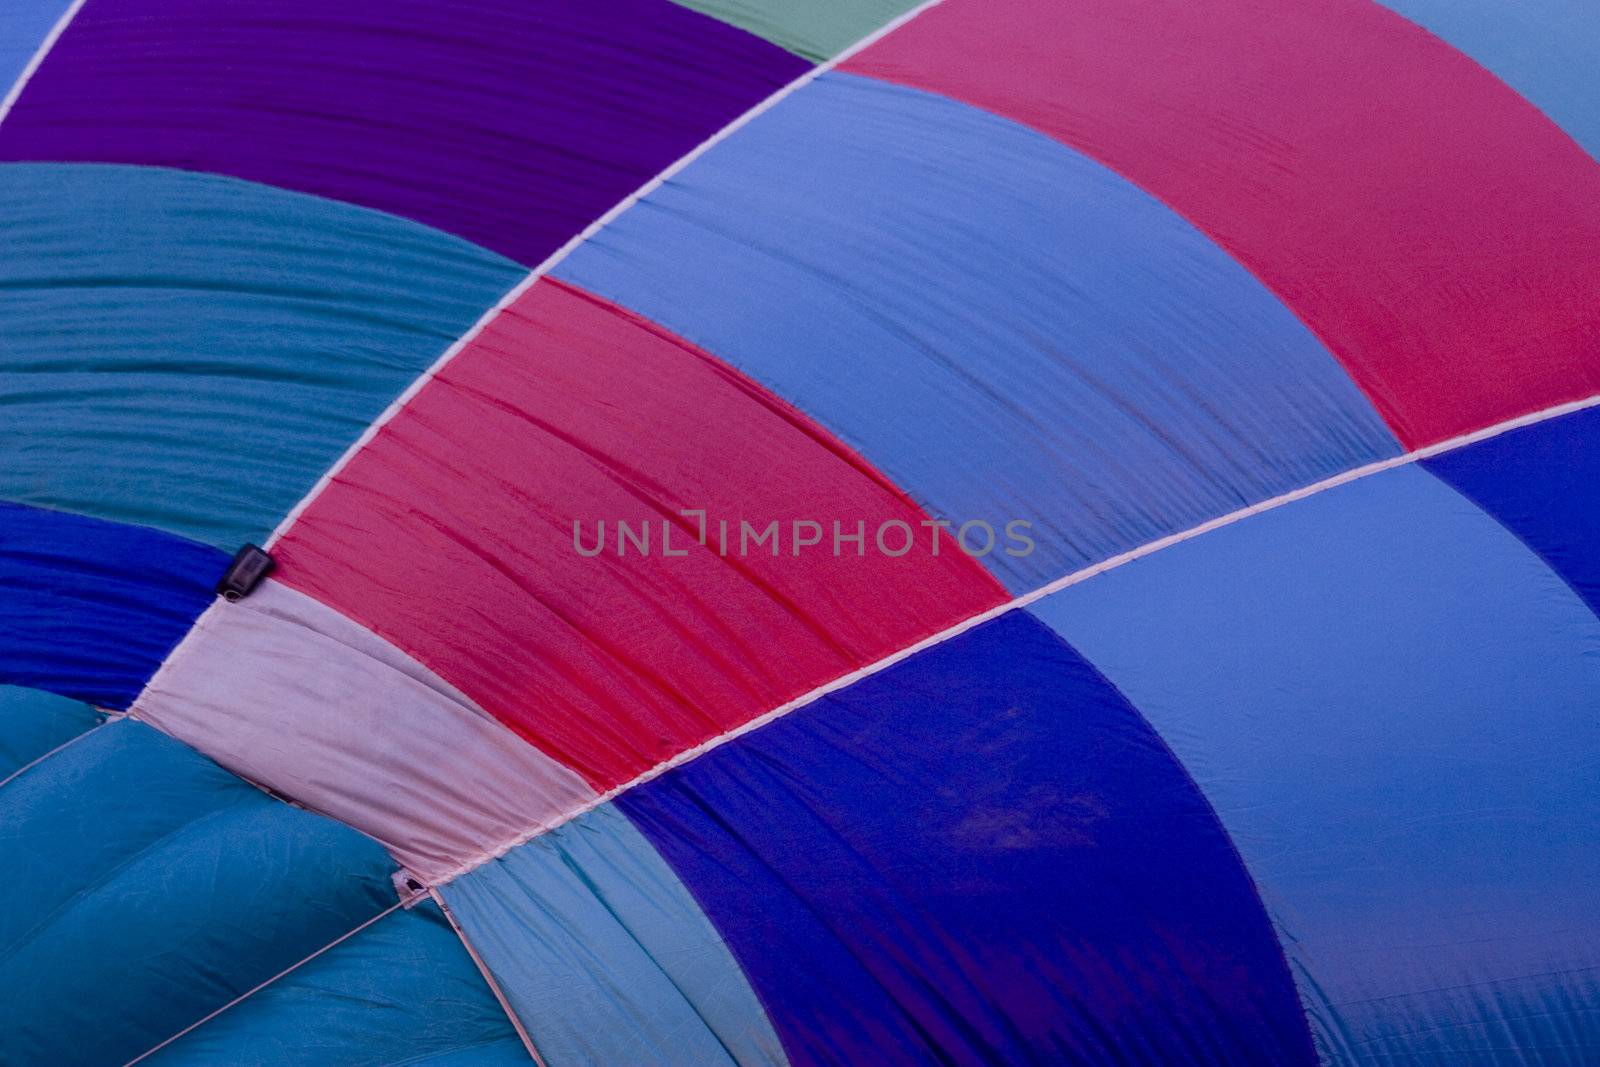 Hot air balloon textures by jeremywhat